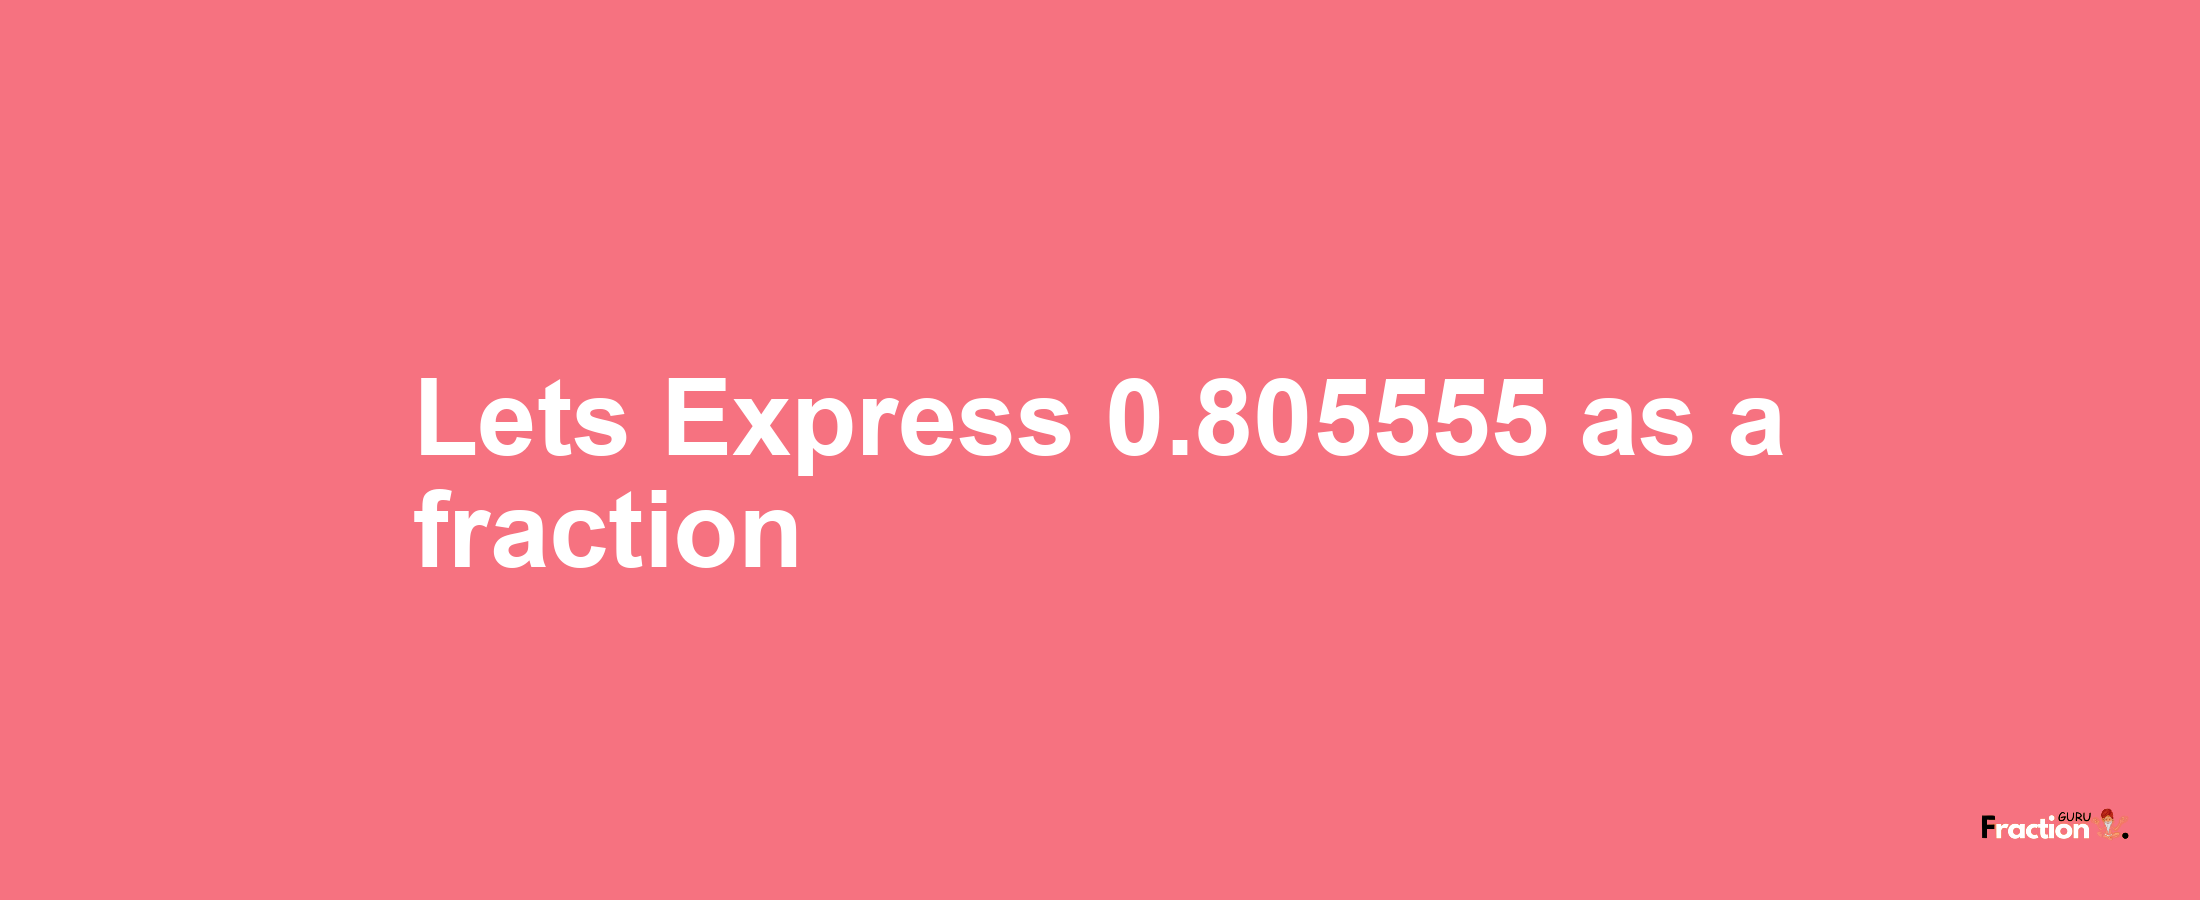 Lets Express 0.805555 as afraction